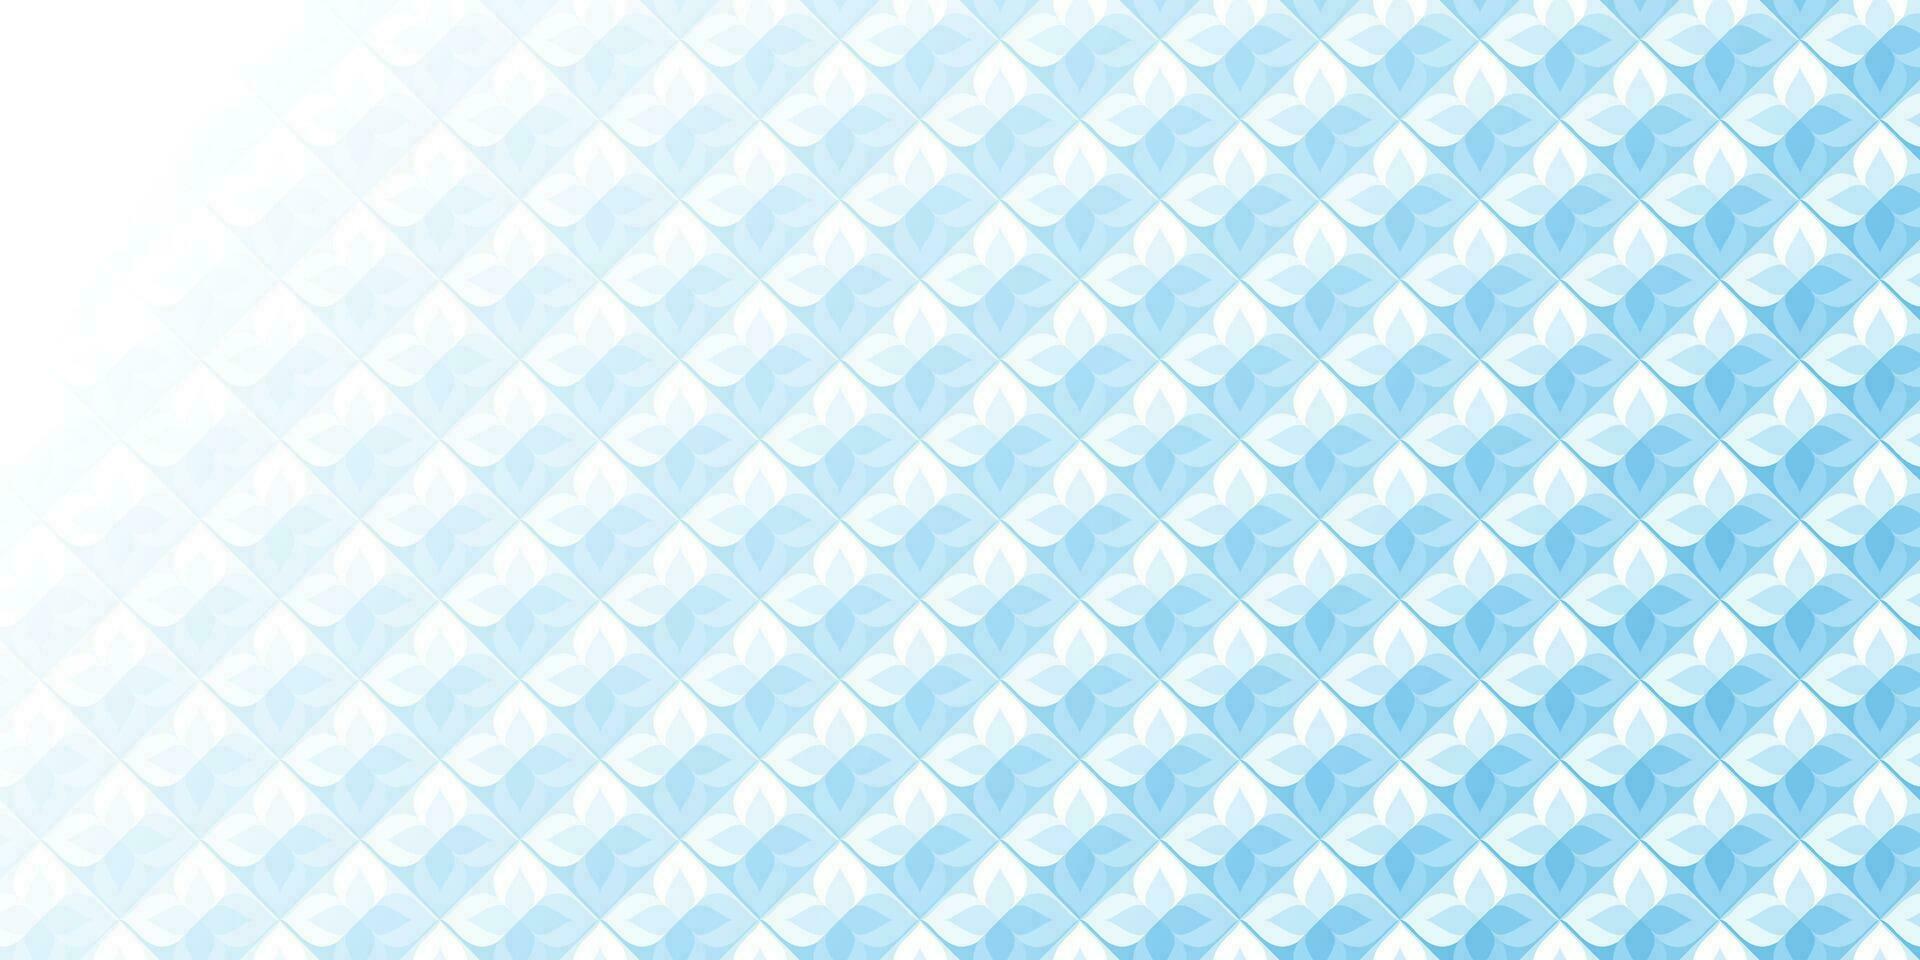 Abstract white and blue geometric background texture vector